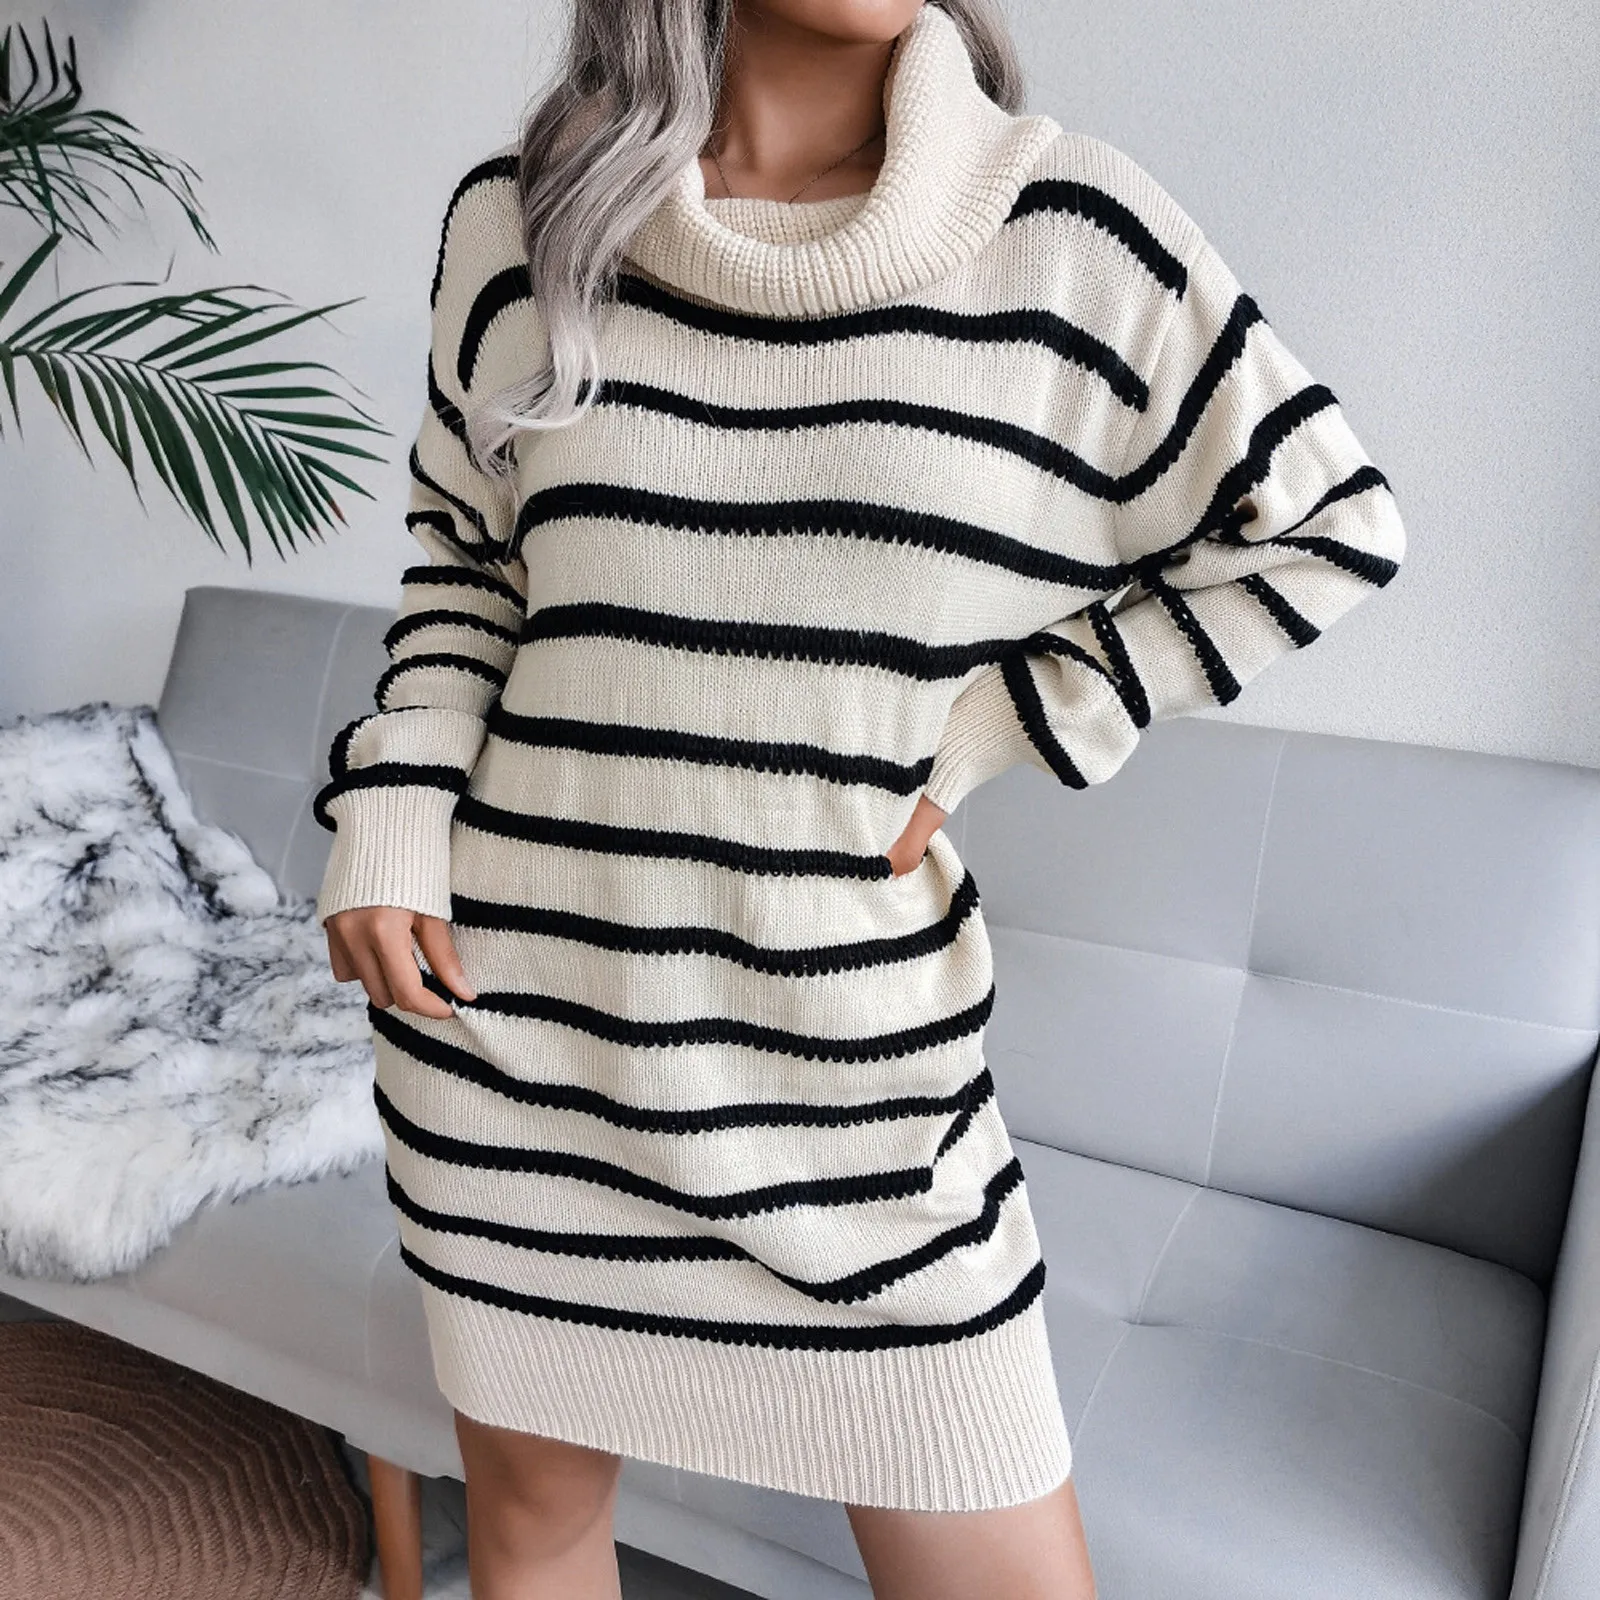 Women Turtleneck Long Sleeve Loose Chunky Knitted Pullover Sweater Jumper Dress Cashmere...